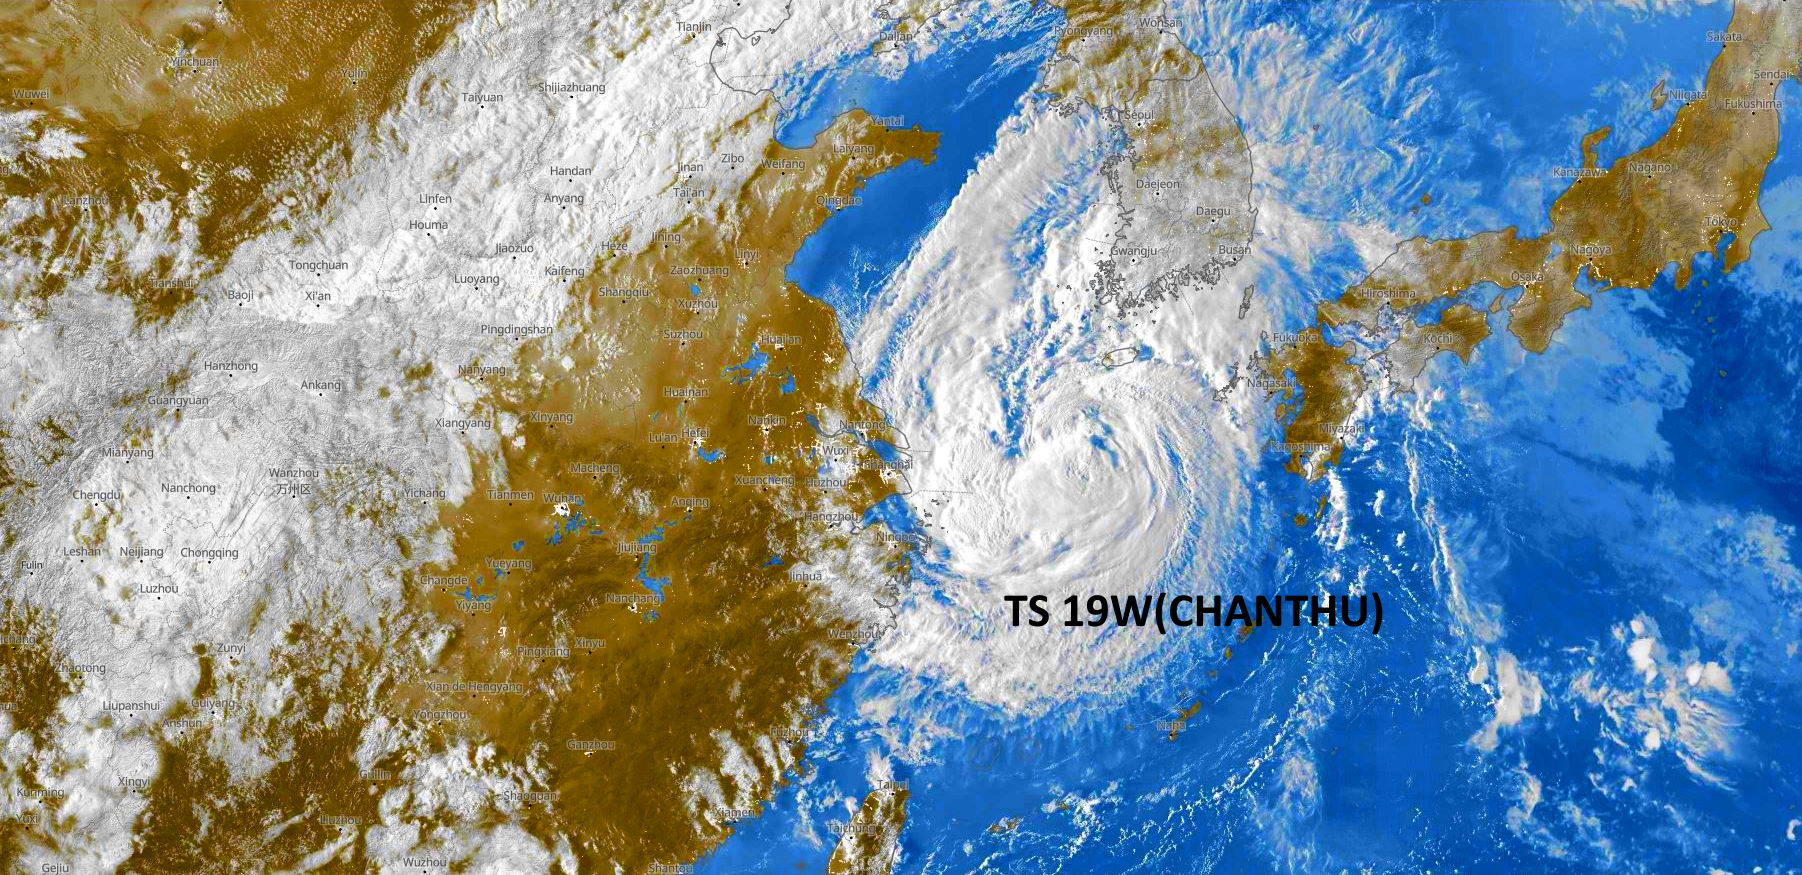 TS 19W(CHANTHU). SATELLITE ANALYSIS, INITIAL POSITION AND INTENSITY DISCUSSION: TROPICAL STORM 19W APPEARS TO HAVE FINALLY STARTED ITS LONG-AWAITED TRACK TOWARDS THE NORTHEAST. ANIMATED MULTISPECTRAL SATELLITE IMAGERY (MSI) DEPICTS A VERY WELL DEFINED SWIRL OF LOW-LEVEL CLOUD BANDS WRAPPING INTO A LOW-LEVEL CIRCULATION CENTER (LLCC) OBSCURED BY FLARING CONVECTION EXTENDING SOUTHWARD FROM THE ASSESSED CENTER POSITION. THE INITIAL POSITION IS PLACED WITH HIGH CONFIDENCE BASED ON THE ANIMATED VISIBLE IMAGERY, AND WITHIN THE CONGRUENCE OF AGENCY FIX POSITIONS. THE INITIAL INTENSITY REMAINS ASSESSED AT 55 KNOTS WITH MEDIUM CONFIDENCE BASED ON THE MEDIAN OF THE AGENCY CURRENT INTENSITY ESTIMATES, HEDGED SLIGHTLY HIGHER THAN THE ADT AND SATCON ESTIMATES.  THE OVERALL STRUCTURE APPEARS SHEARED WITH AN AREA TO THE NORTH OF THE LLCC DEVOID OF ANY SIGNIFICANT CONVECTION. ANALYSIS OF A 160000Z UPPER-AIR SOUNDING FROM HEUKSANDO INDICATE THE PRESENCE OF VERY DRY AIR BETWEEN 300-600MB, WHICH SUPPORTS WHAT IS SEEN IN THE IMAGERY. ADDITIONALLY, WHILE HIGH-RESOLUTION HWRF SOUNDINGS AND CIMSS AUTOMATED UPPER-LEVEL ANALYSIS REVEALS LOW SOUTHERLY WIND SHEAR, THE SHARP NORTHERN EDGE OF THE CONVECTION FLARING NEAR THE CENTER CLEARLY SUPPORT A NORTHERLY SHEAR VECTOR OVER TOP OF THE SYSTEM, AND THE LATEST CIMSS ATMOSPHERIC MOTION VECTOR (AMV) ANALYSIS SUGGESTS THE PRESENCE OF A SMALL, WEAK ANTICYCLONE JUST NORTHWEST OF THE LLCC, WHICH WOULD SUPPORT A NORTHERLY WIND AT 200MB OVER TOP OF 19W. EXCEPTING THE DRY AIR AND THE NORTHERLY SHEAR, THE ENVIRONMENT OTHERWISE FAVORABLE WITH WARM SSTS AND ROBUST POLEWARD OUTFLOW.